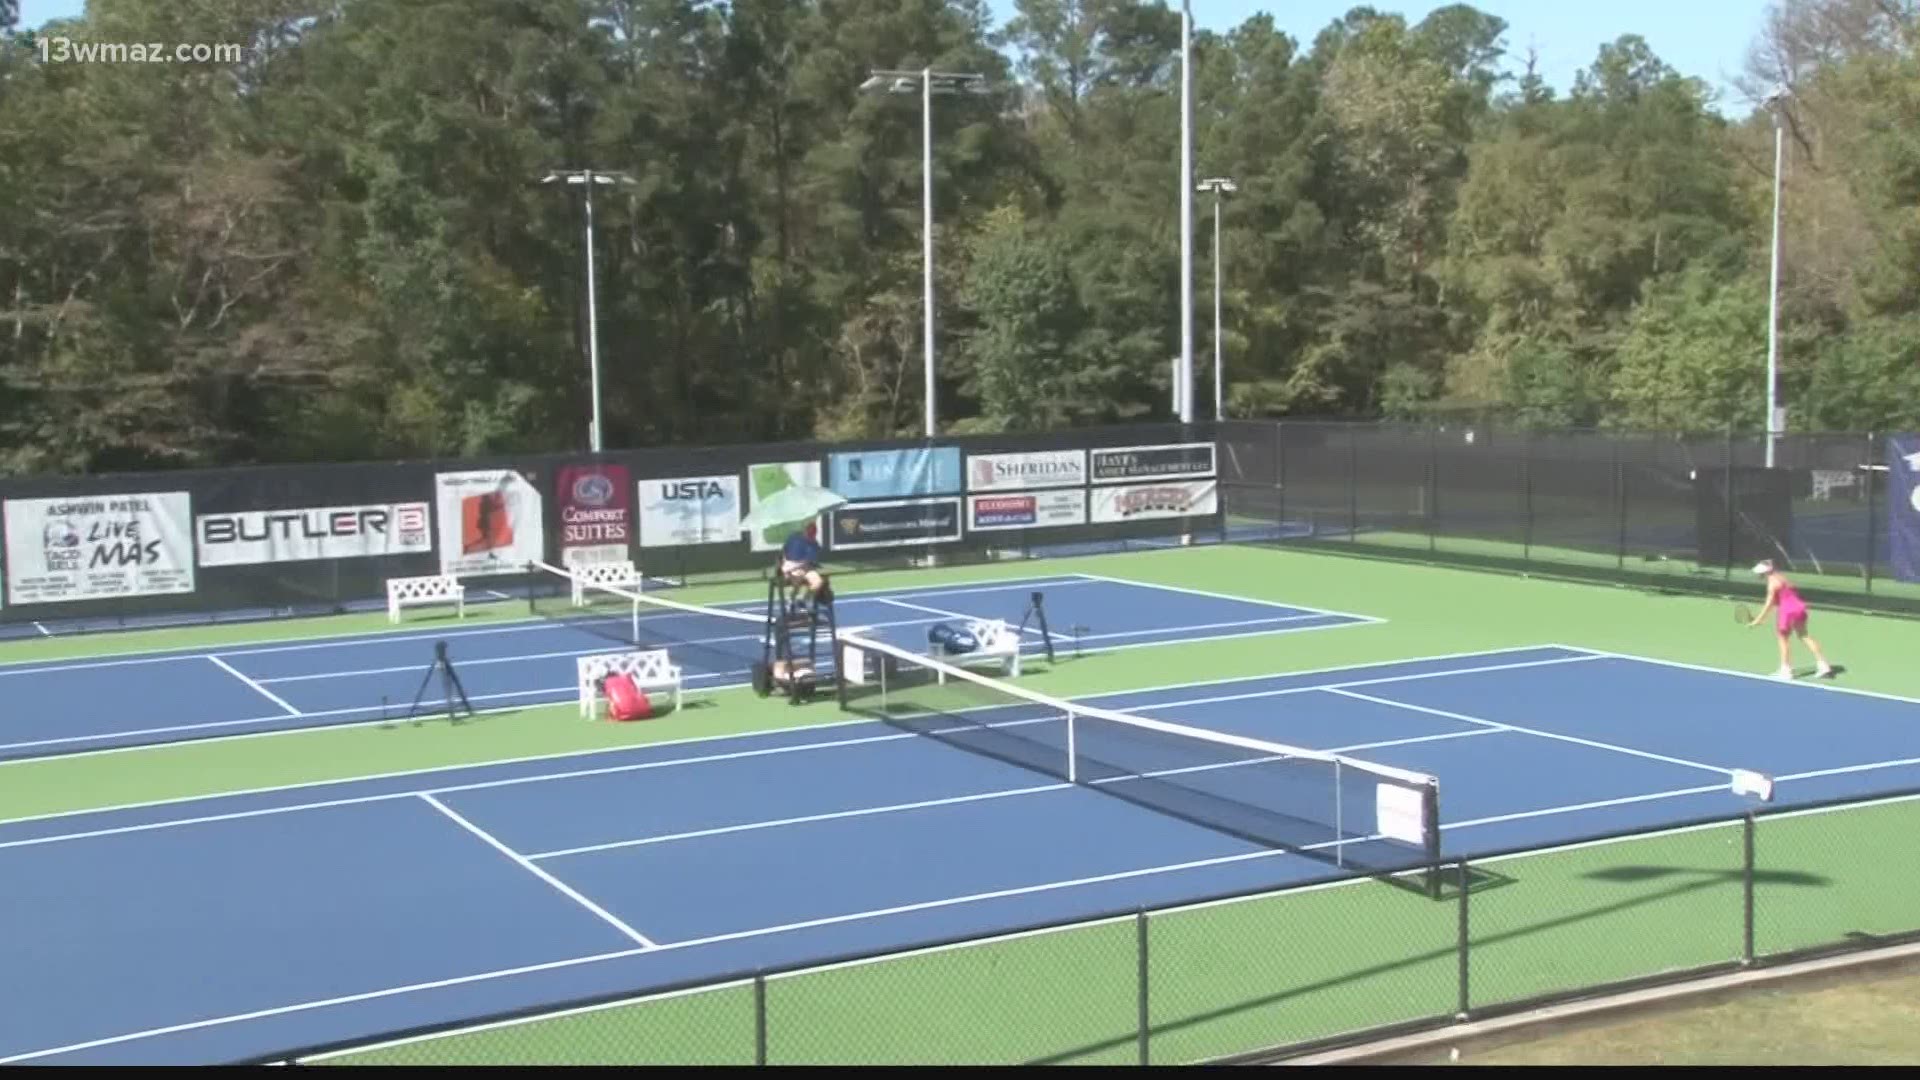 The Mercer Tennis Classic is in its 8th year of existence and is the longest running pro women's tennis event in the state of Georgia.